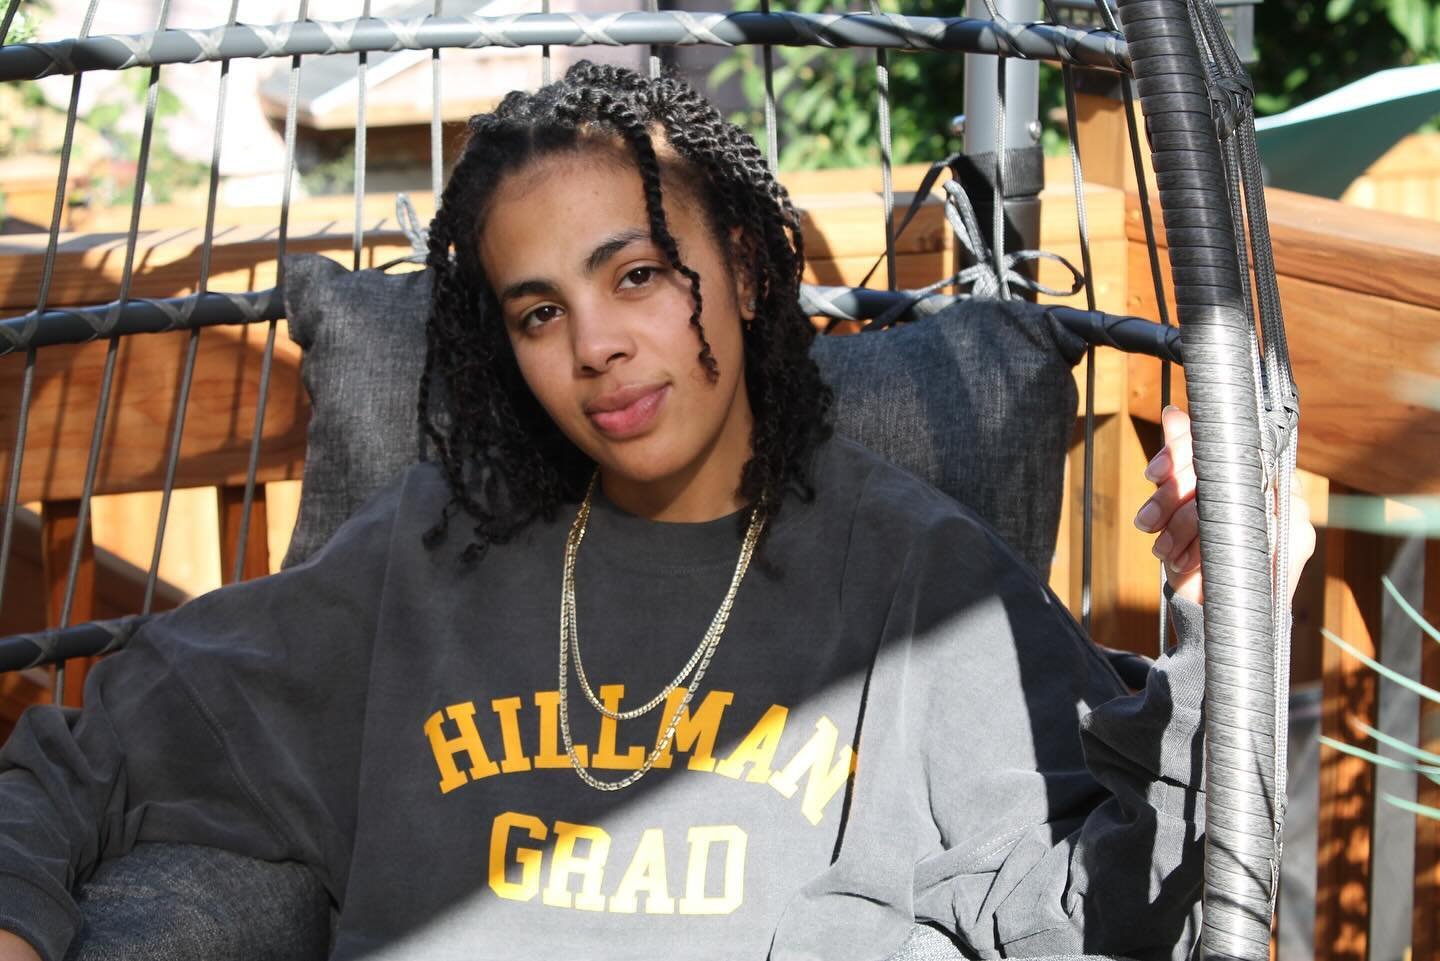 Meet Abi Rich! 🇵🇷 

We chat about her upbringing in Boston, how @twentiesonbet inspired her to pursue a career in TV, writing scripts about characters chasing wealth, and our adventures together during the @lenawaithe @hillmangrad Mentorship Lab!

